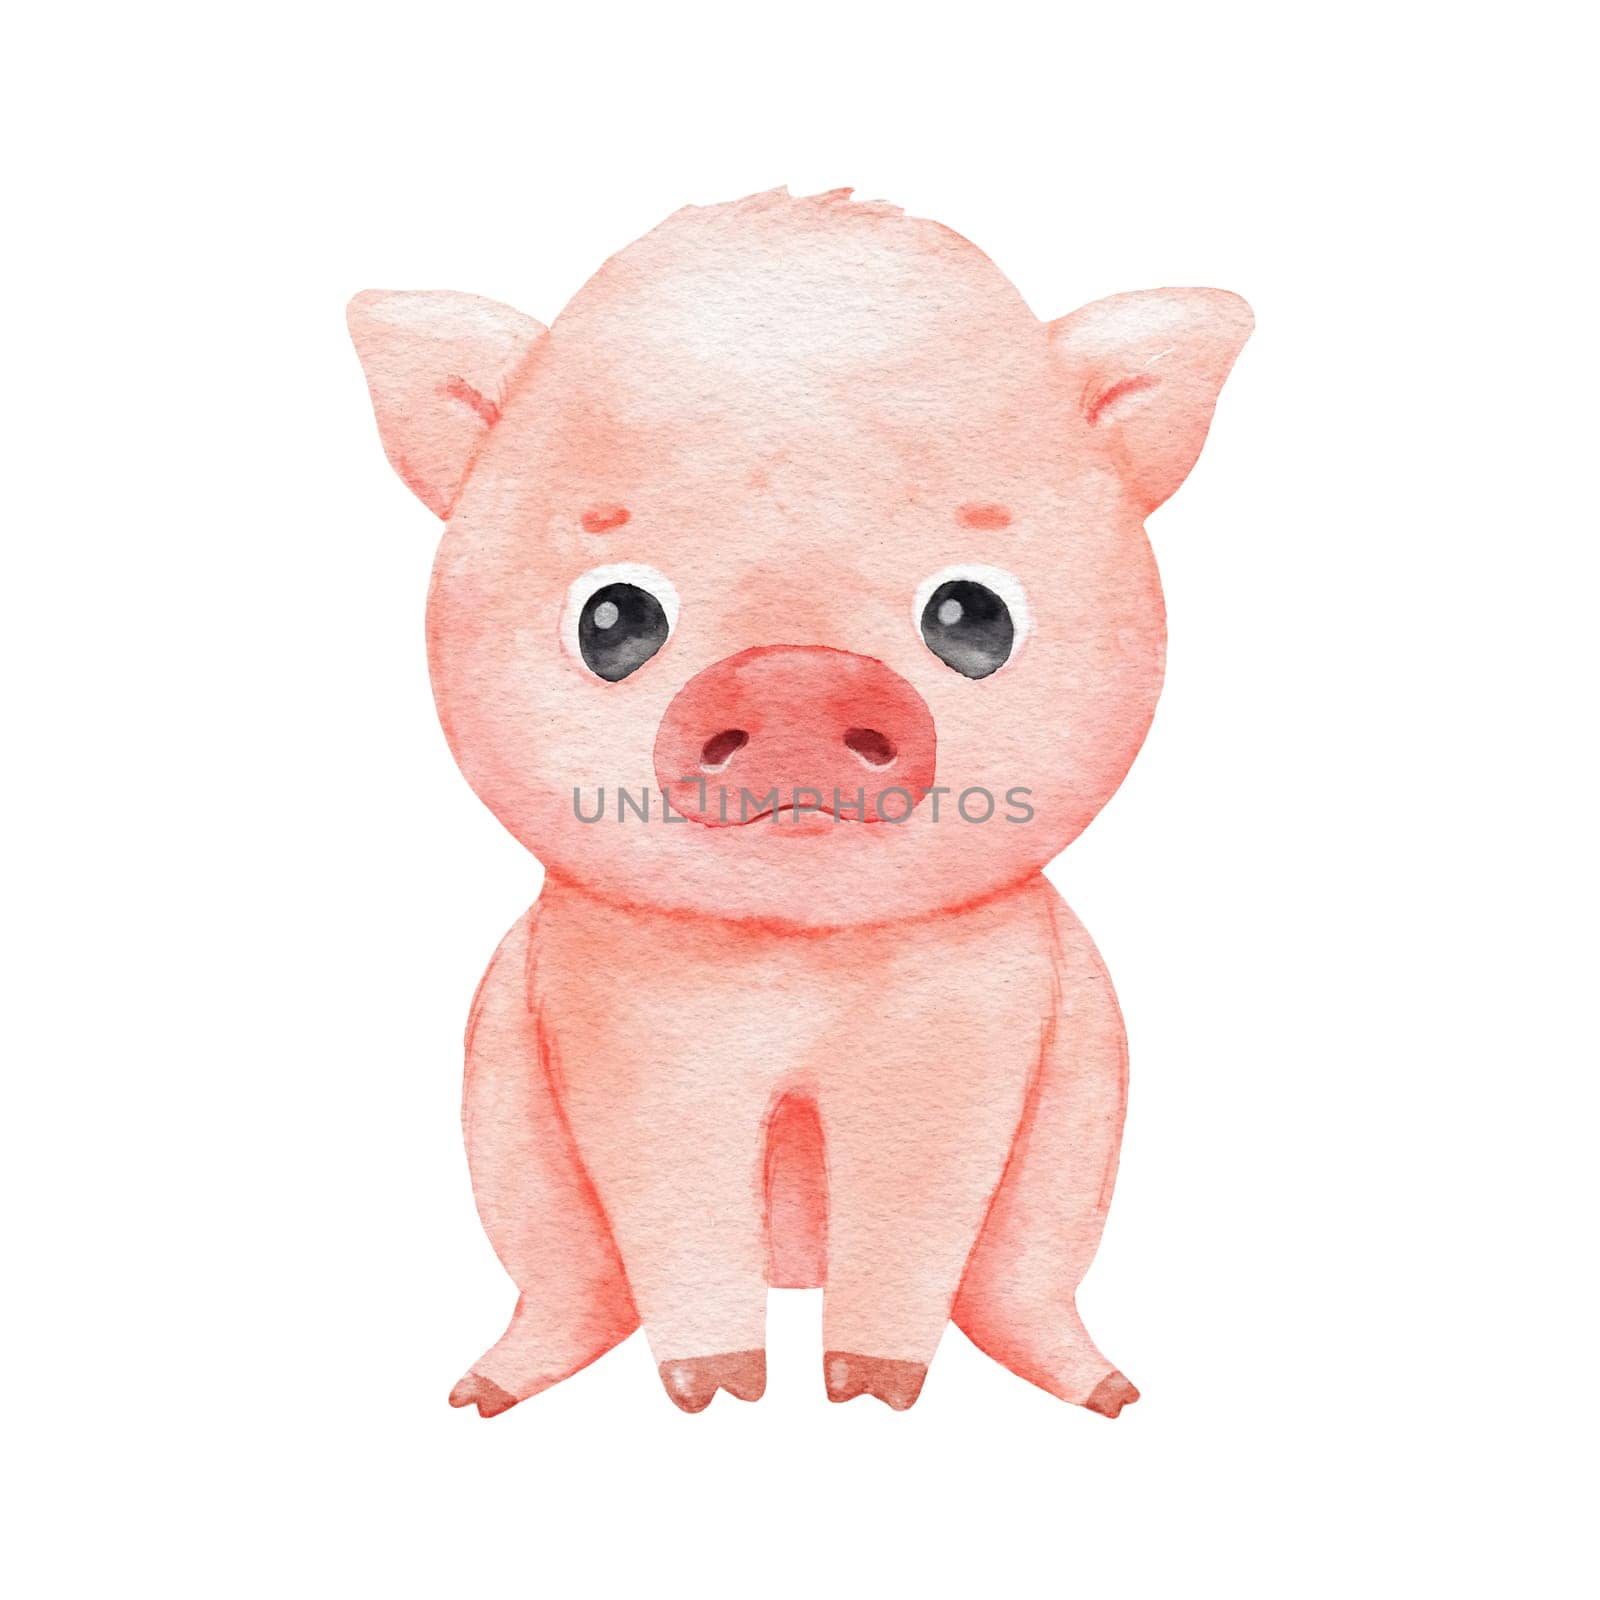 Cute cartoon piglet isolated on white. Watercolor farm animal is sitting. Childish funny character by ElenaPlatova